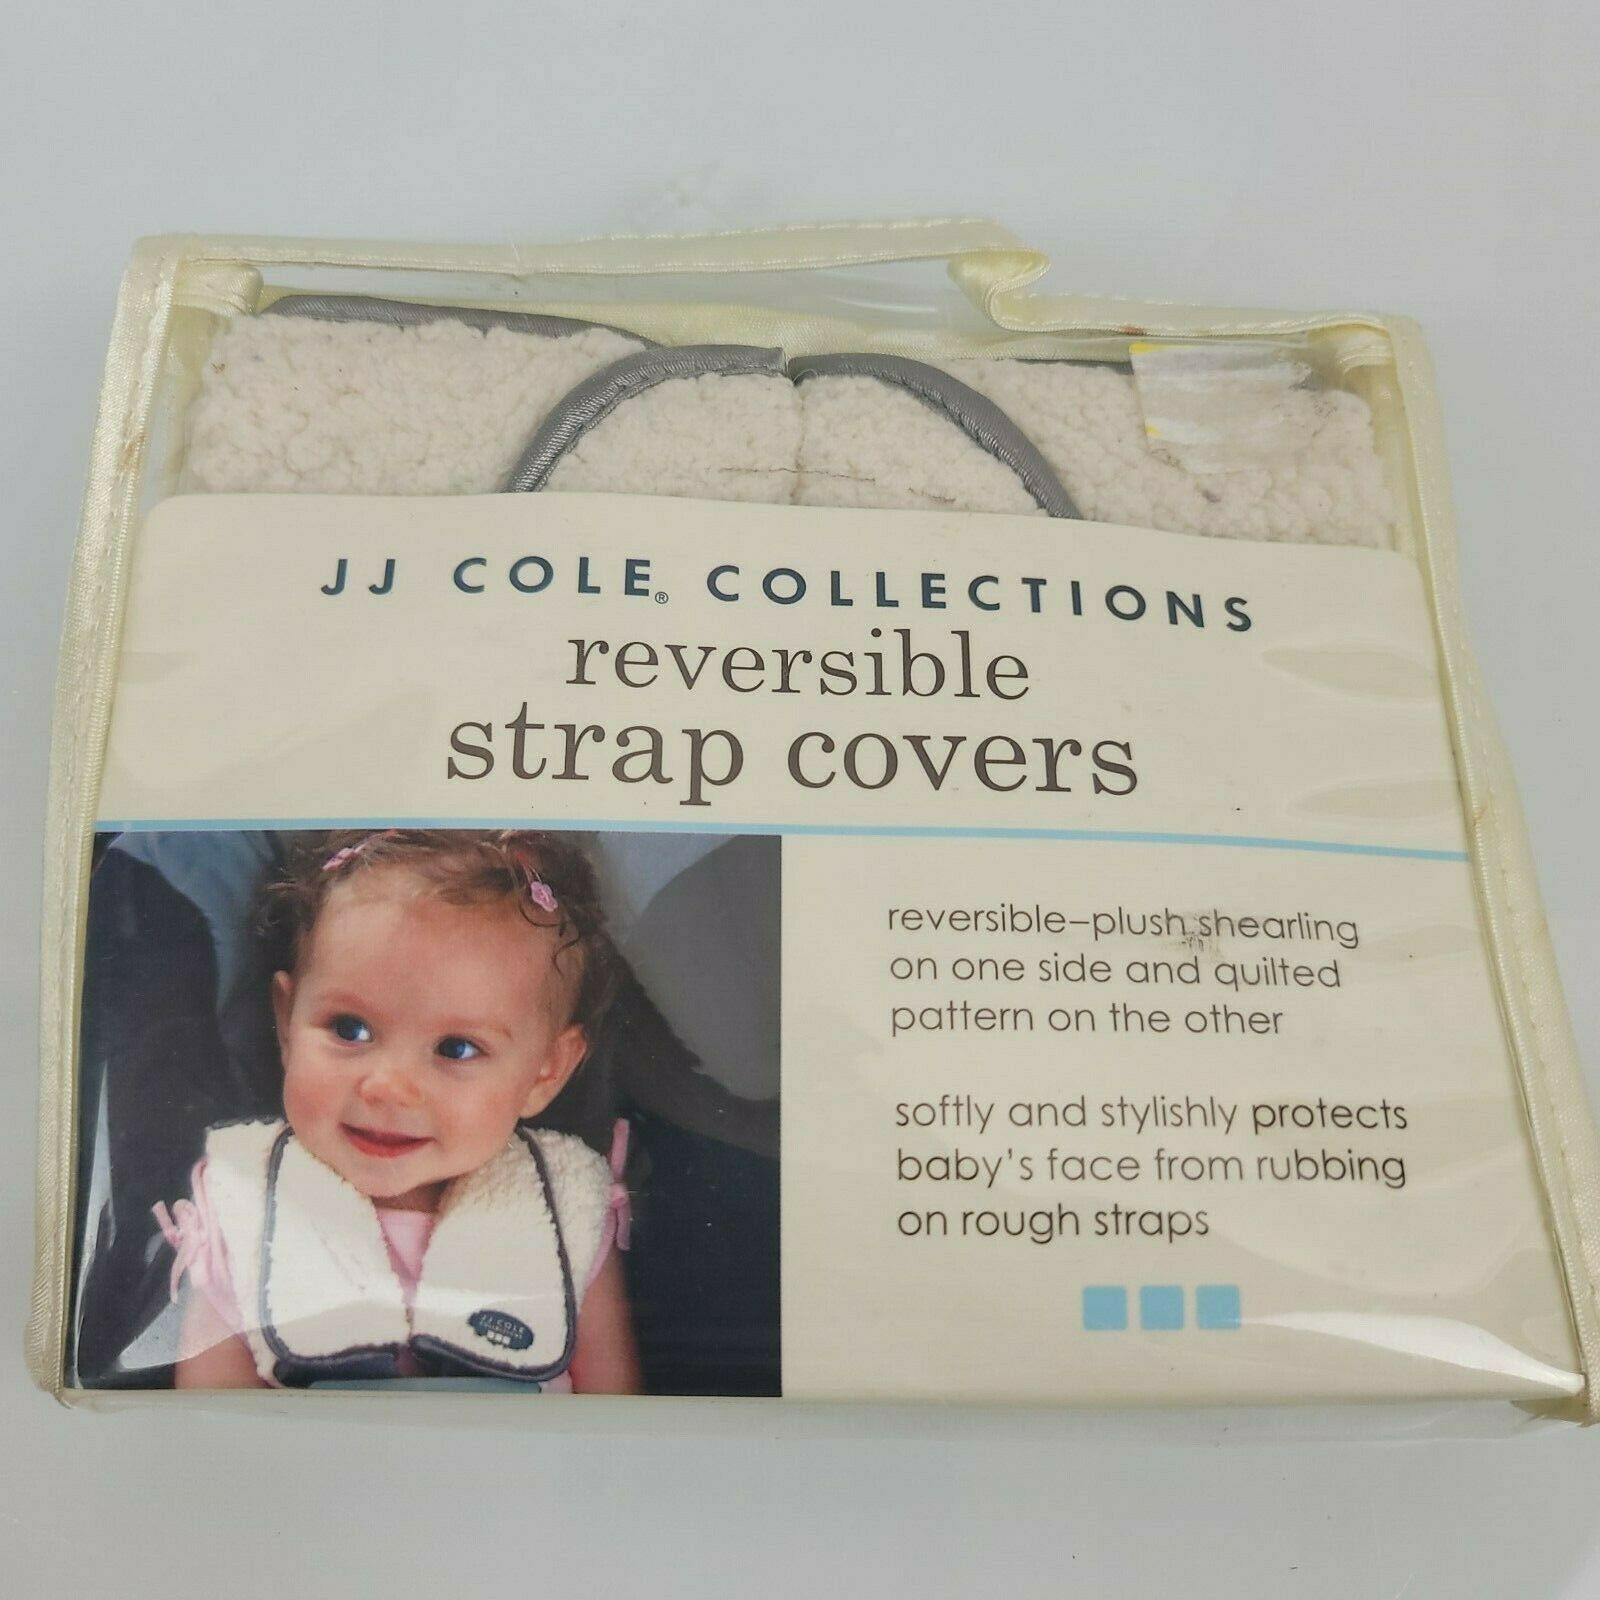 NEW JJ Cole Reversible Plush STRAP COVERS Infant Baby Toddler Car Seat Stroller - $12.87